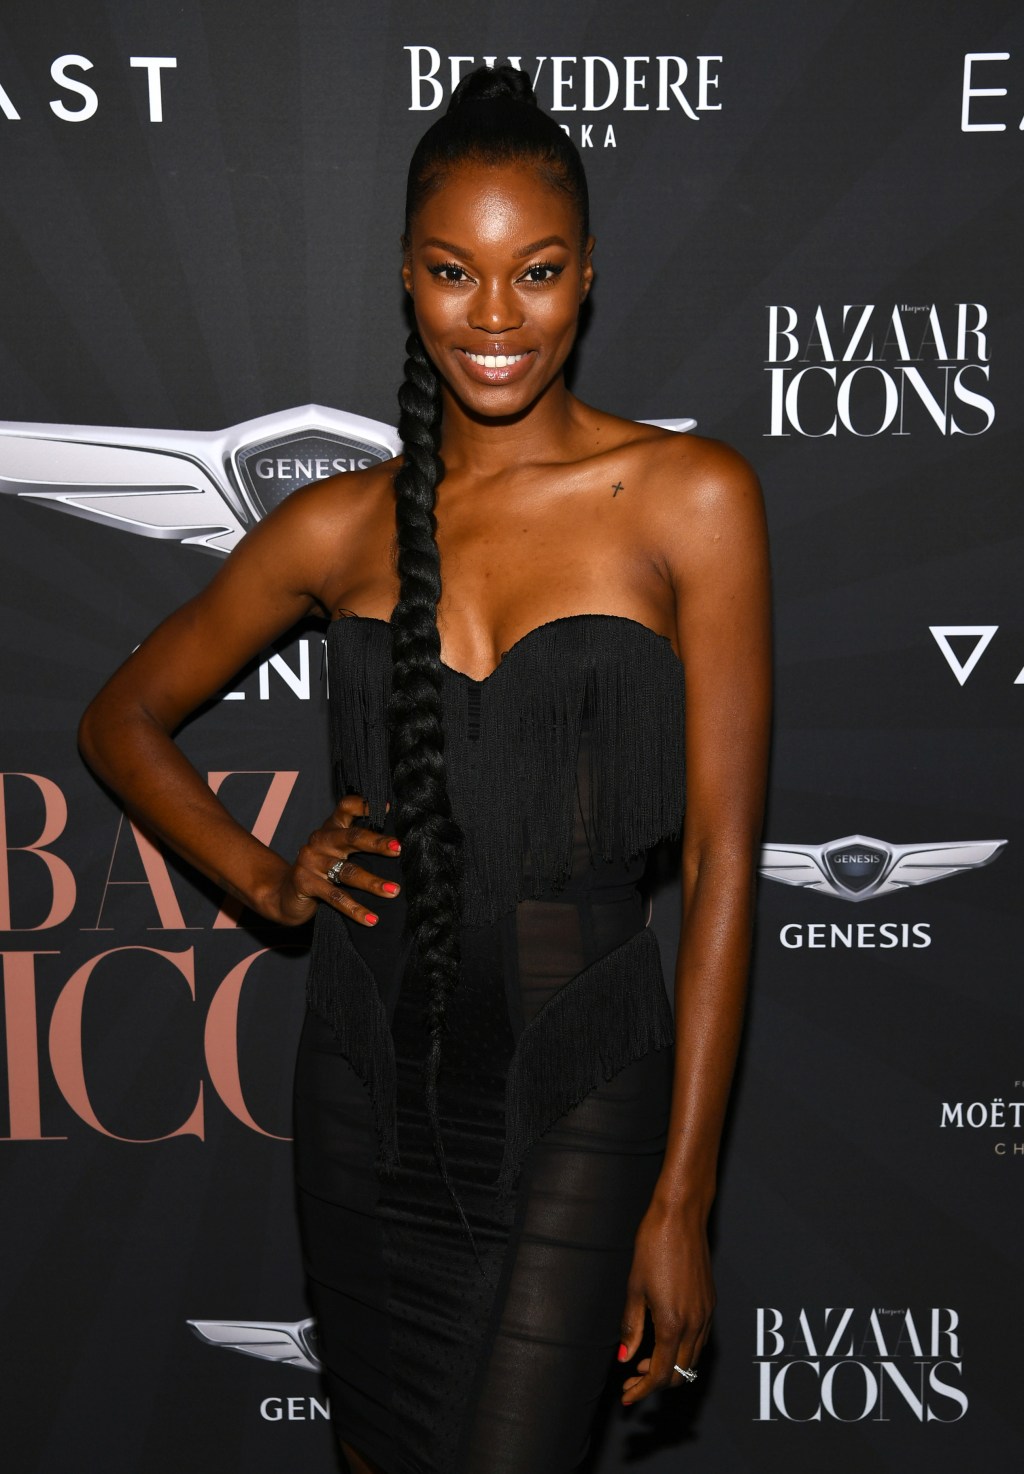 Genesis Presents The Official Harper's Bazaar Icons G-Seventies After Party